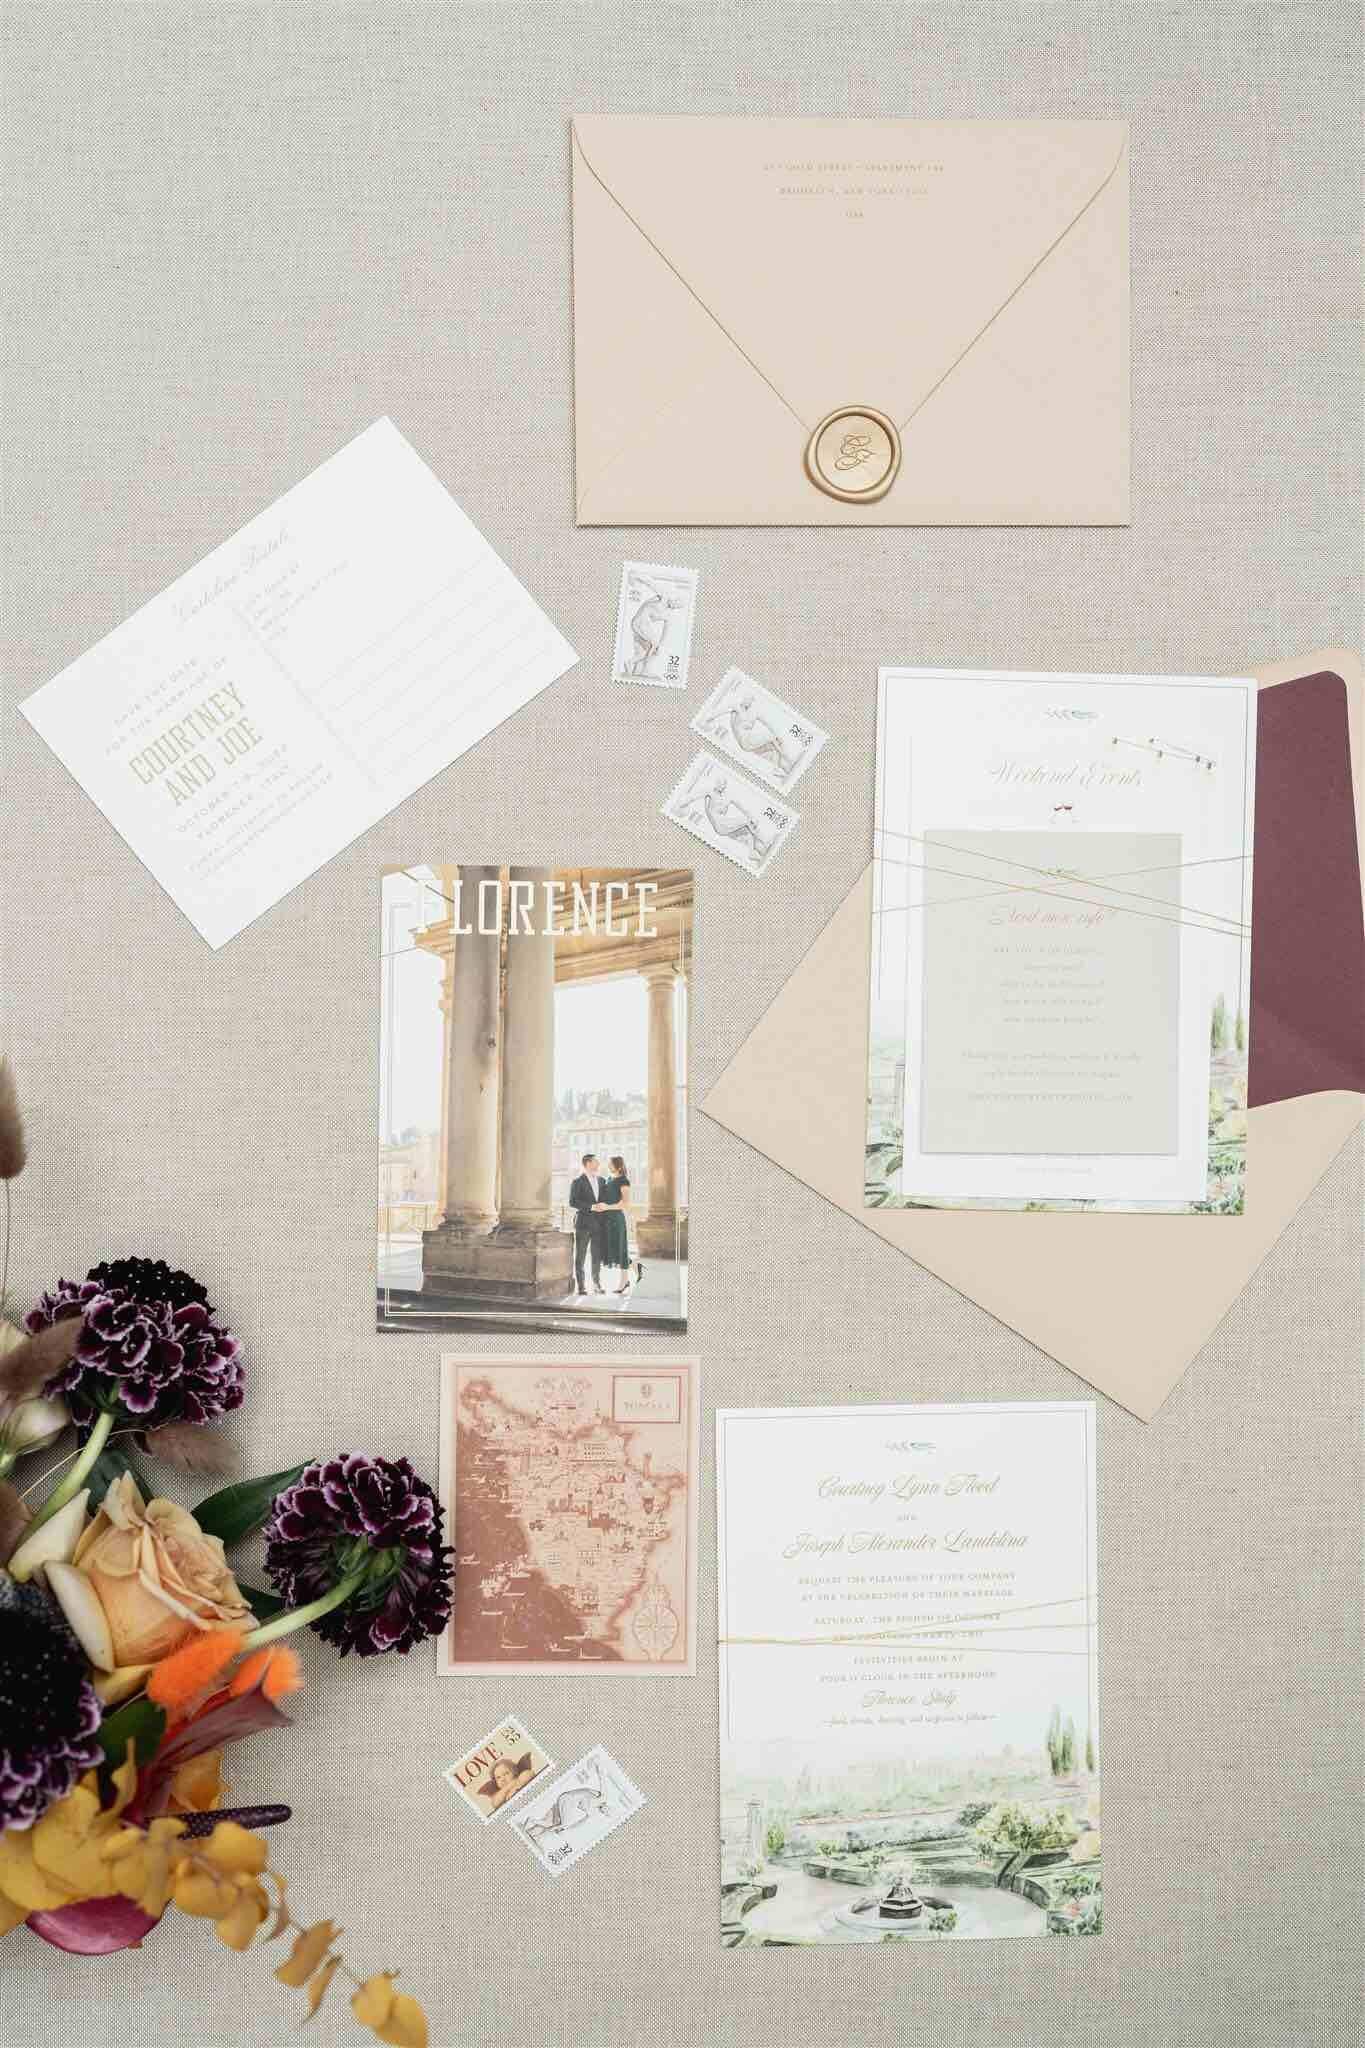 invitations and gift wedding etiquette